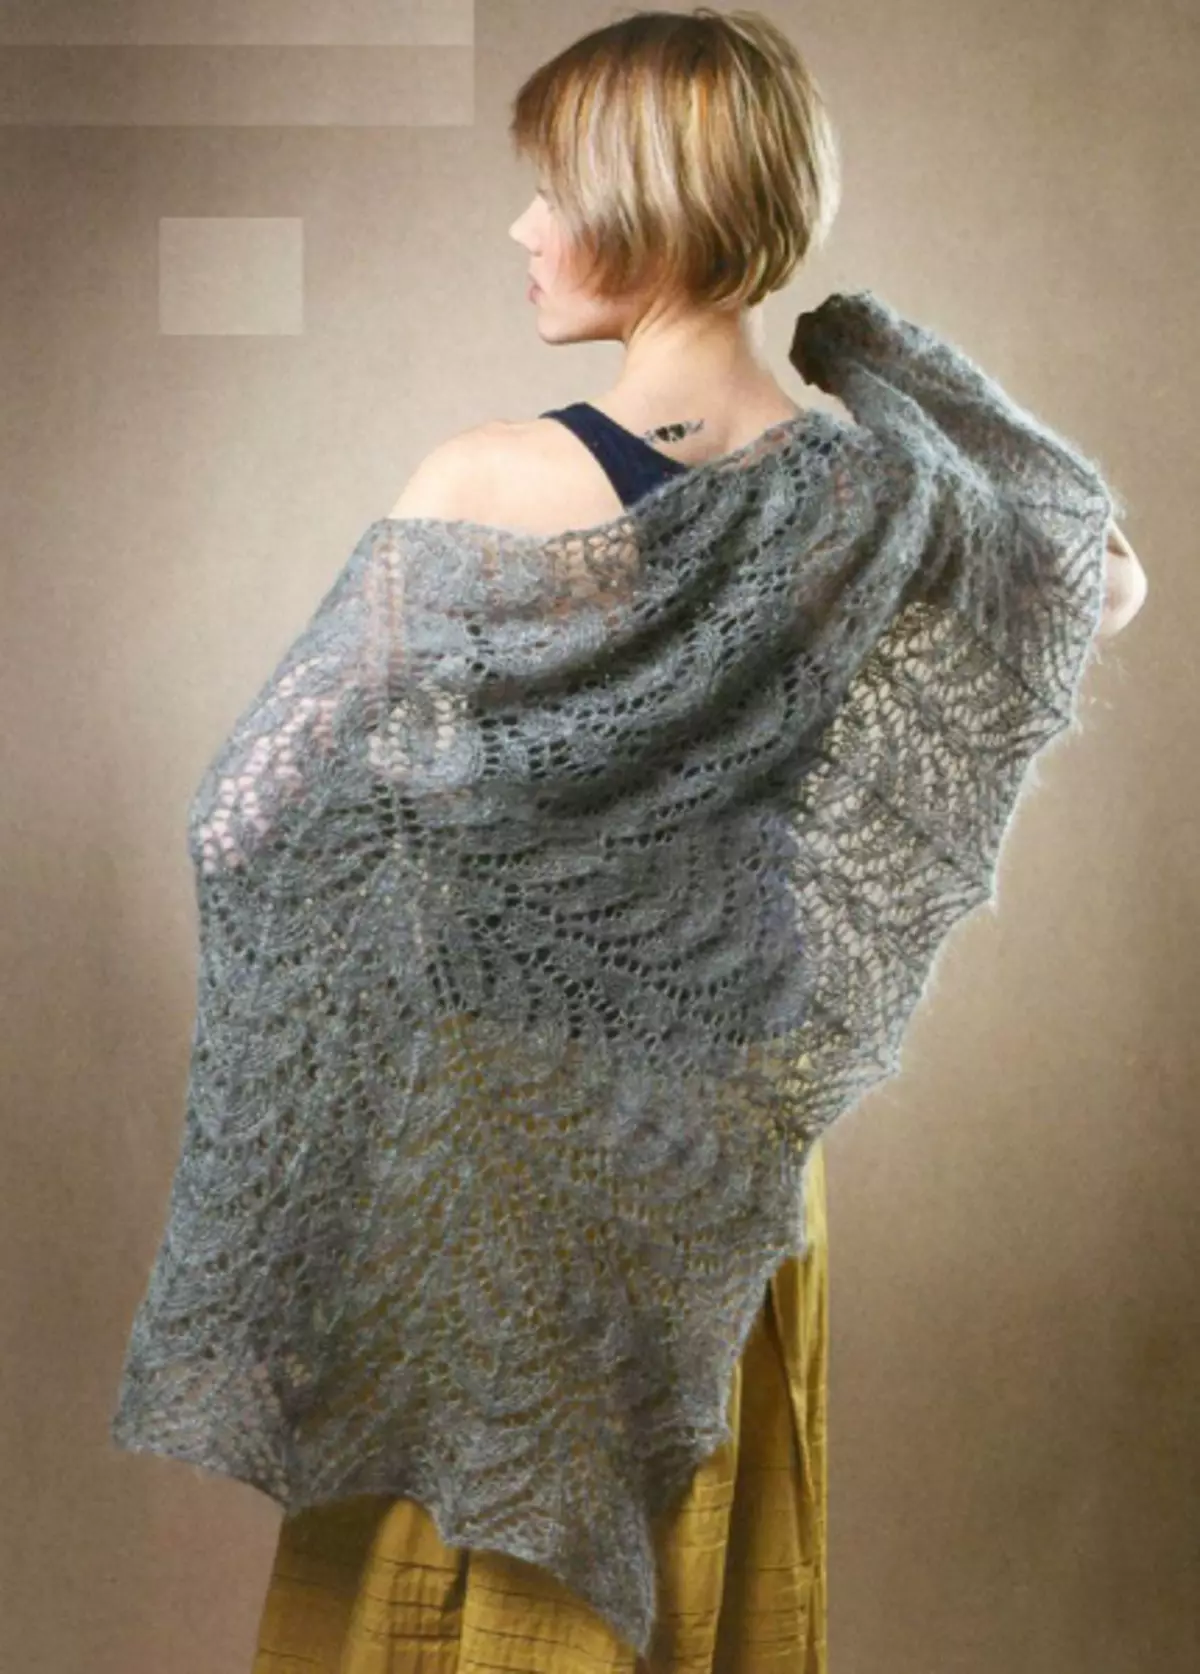 Busswlwork shawl with mohair knitting